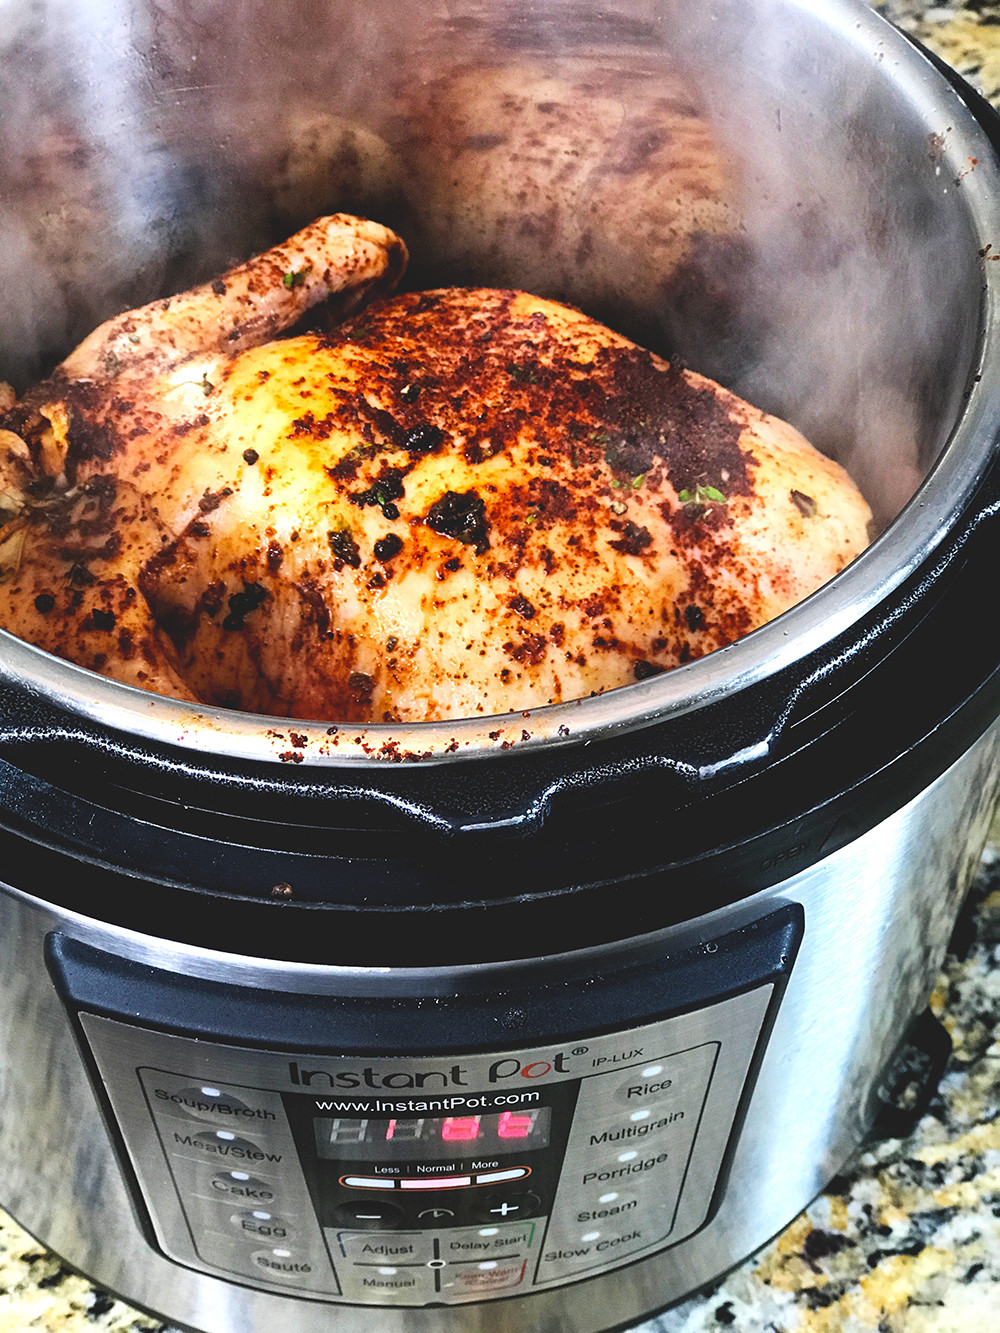 Recipes For Instant Pot Pressure Cooker
 Whole Chicken Pressure Cooker Recipe Using The Instant Pot